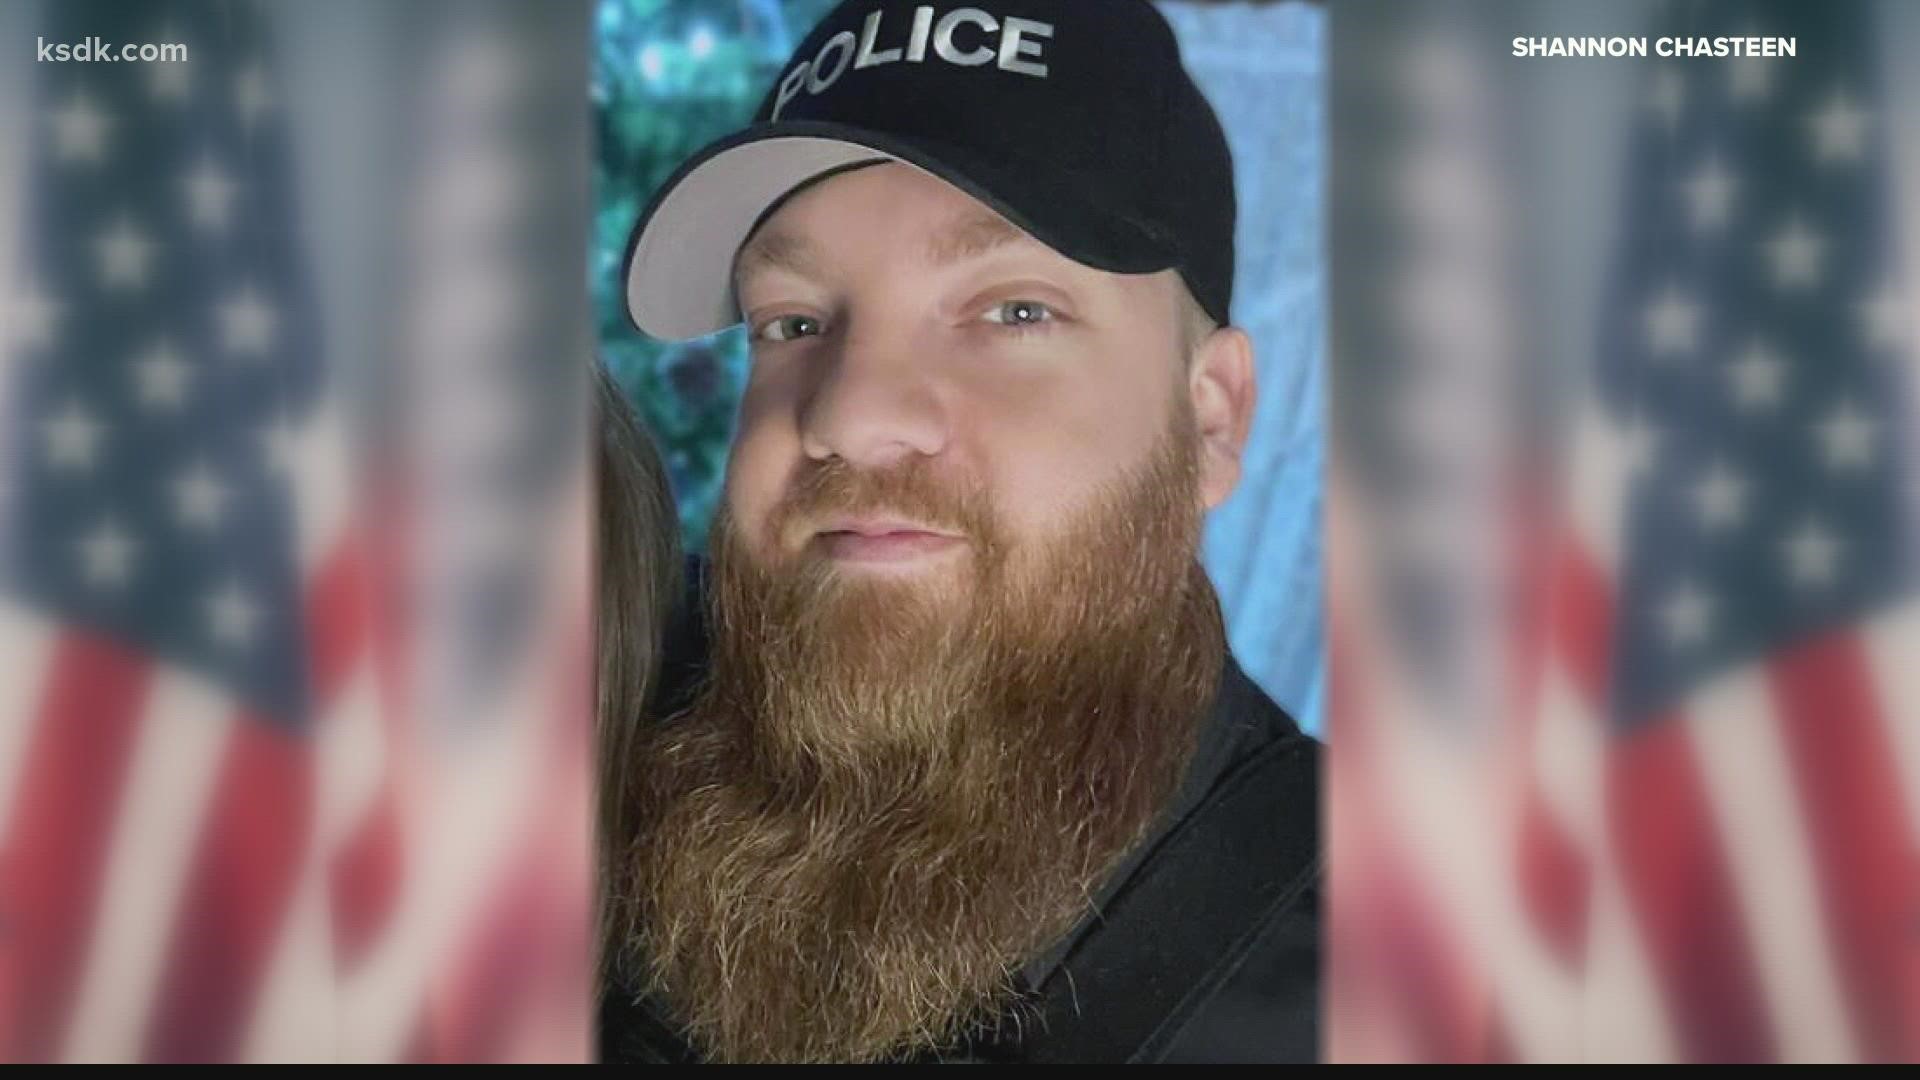 Bonne Terre police officer Lane Burns died and another officer was injured after a man opened fire at a hotel. The suspect is also dead according to highway patrol.